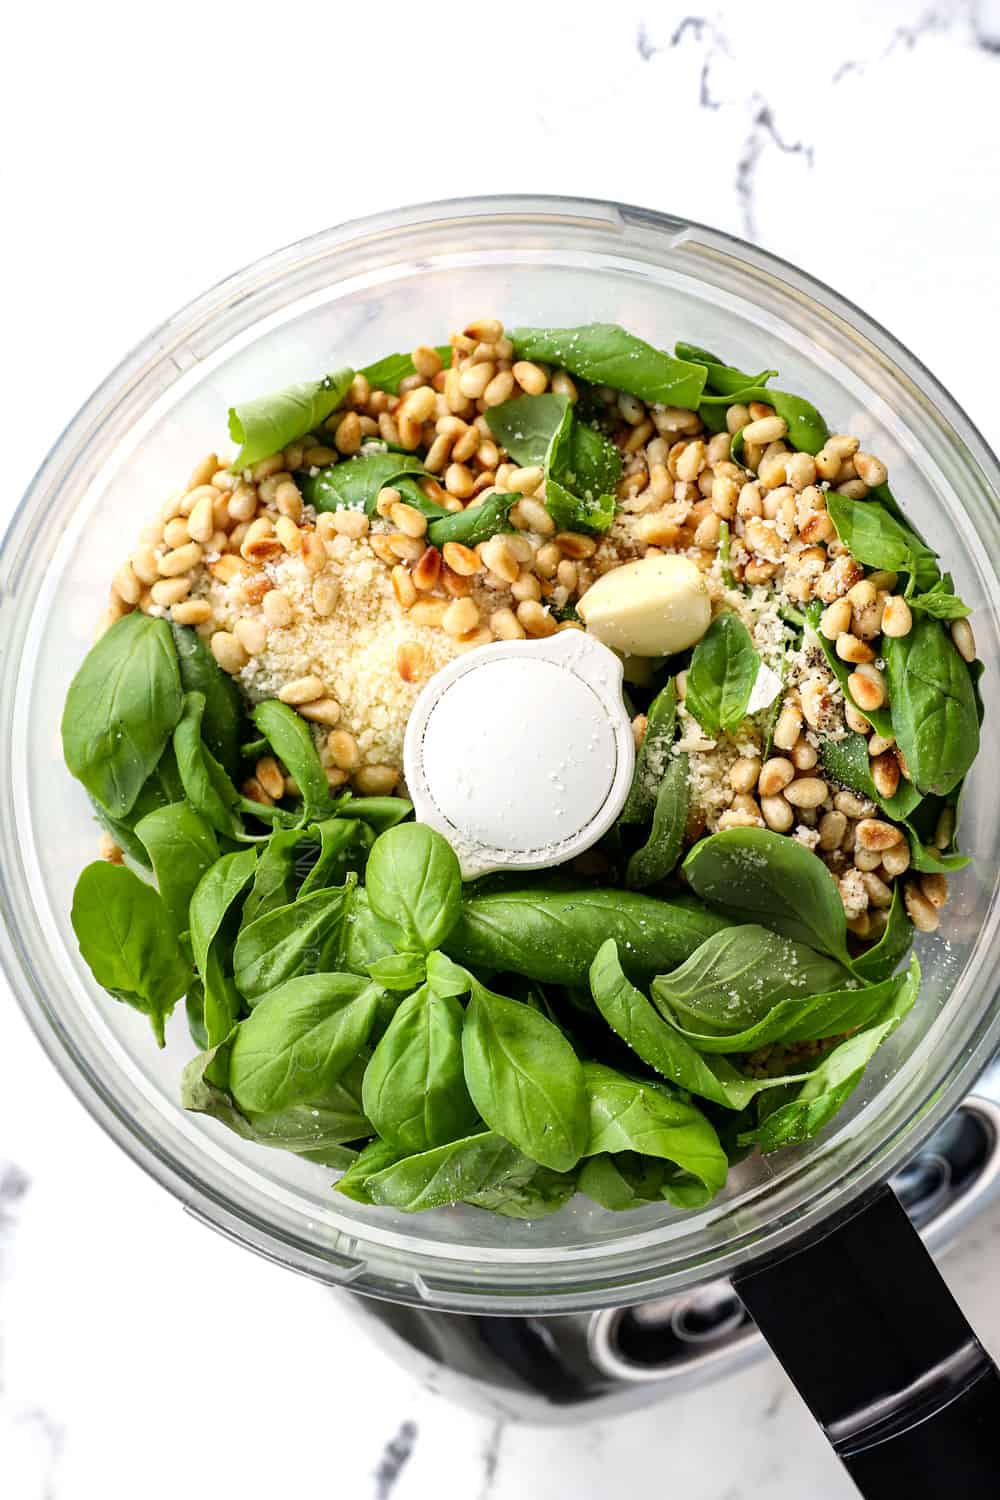 top view showing pesto ingredients in a food processor:  basil, pine nuts, Parmesan and garlic